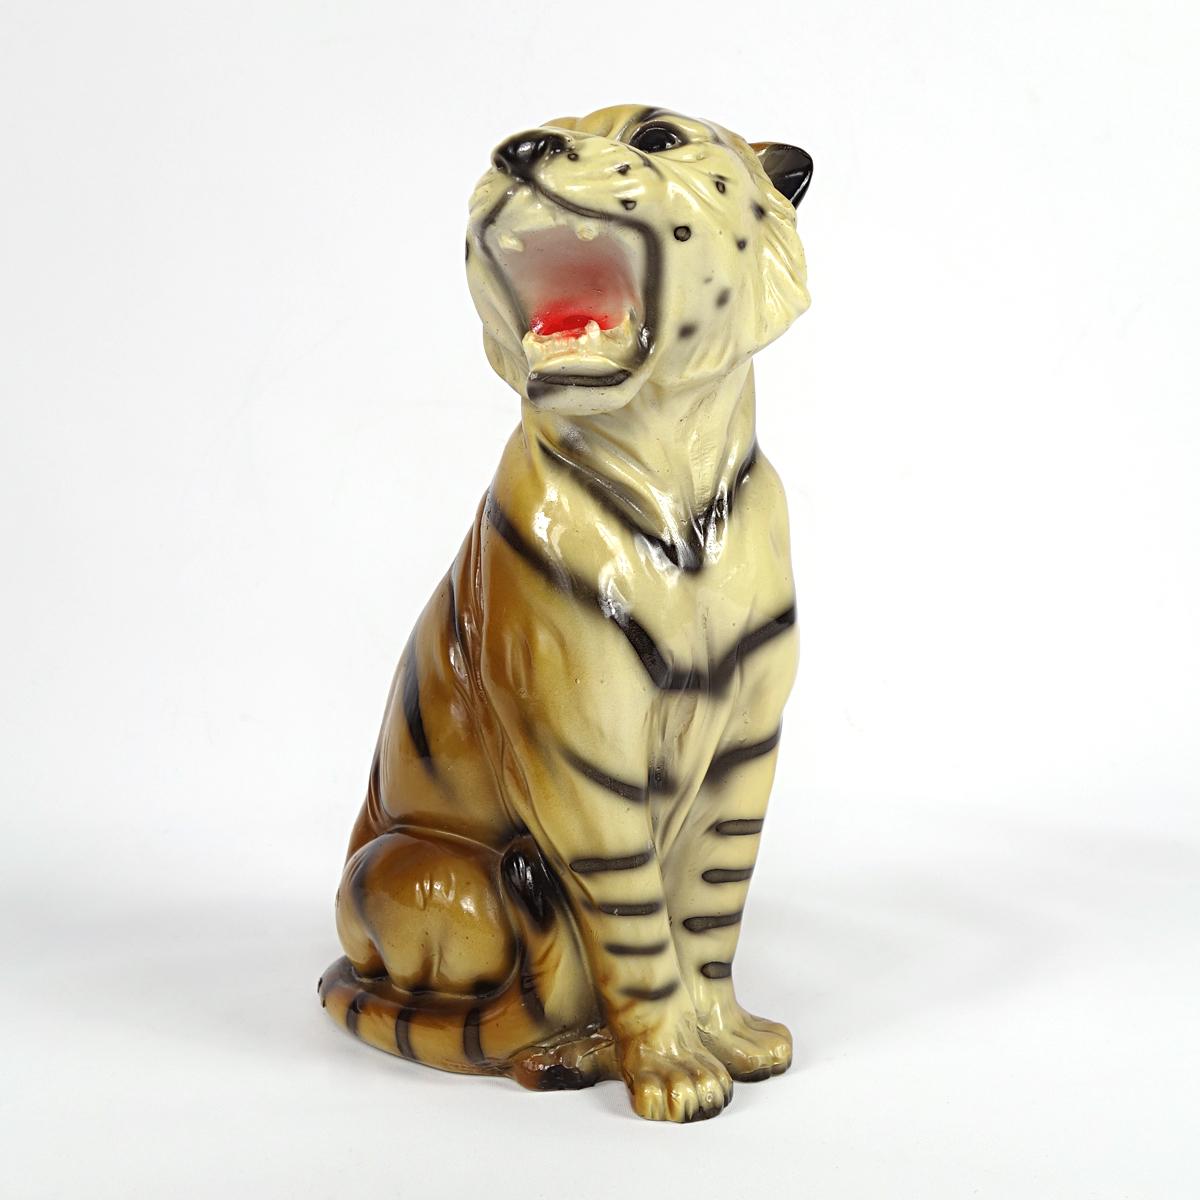 Adorable ceramic tiger cub in the style of, or maybe made by, Ronzan of Italy.

Meowing for its mother this little baby already looks dangerous with its sharp teeth and claws. 

A wonderful addition to your hall table, mantlepiece or bookcase.